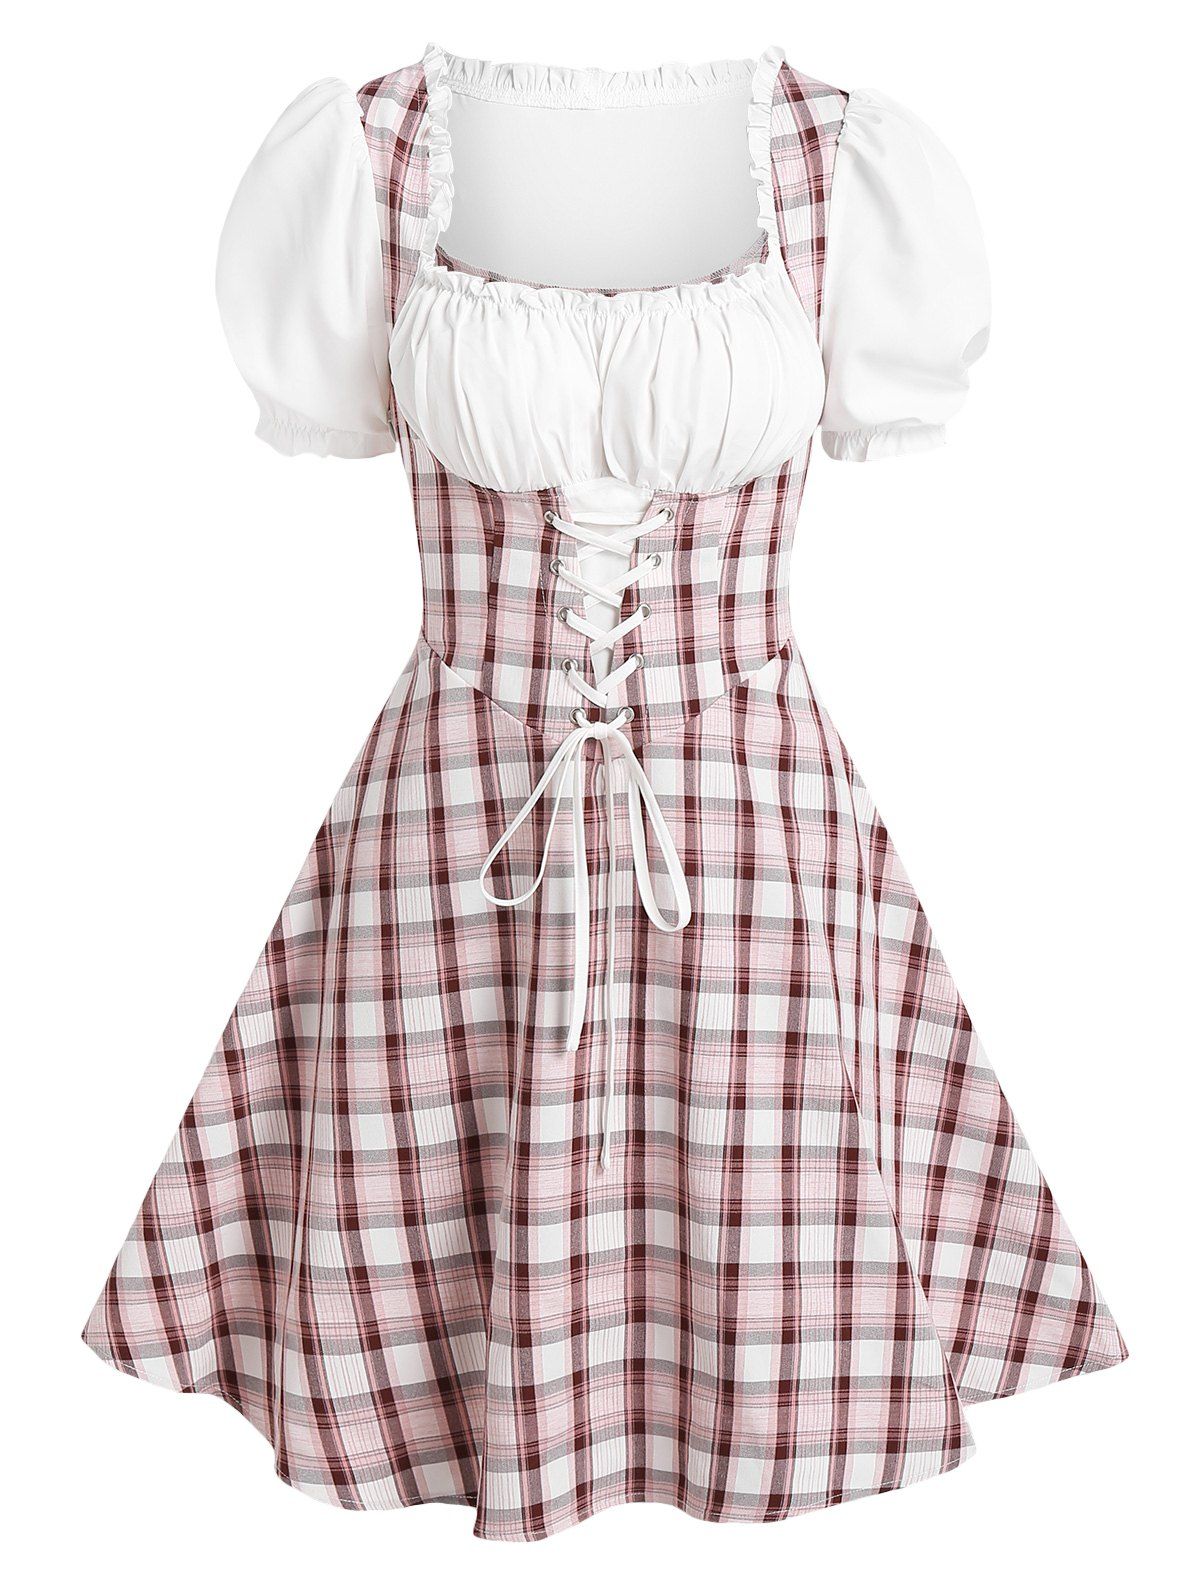 Lace Up Puff Sleeve Plaid 2 in 1 Dress - multicolor XL